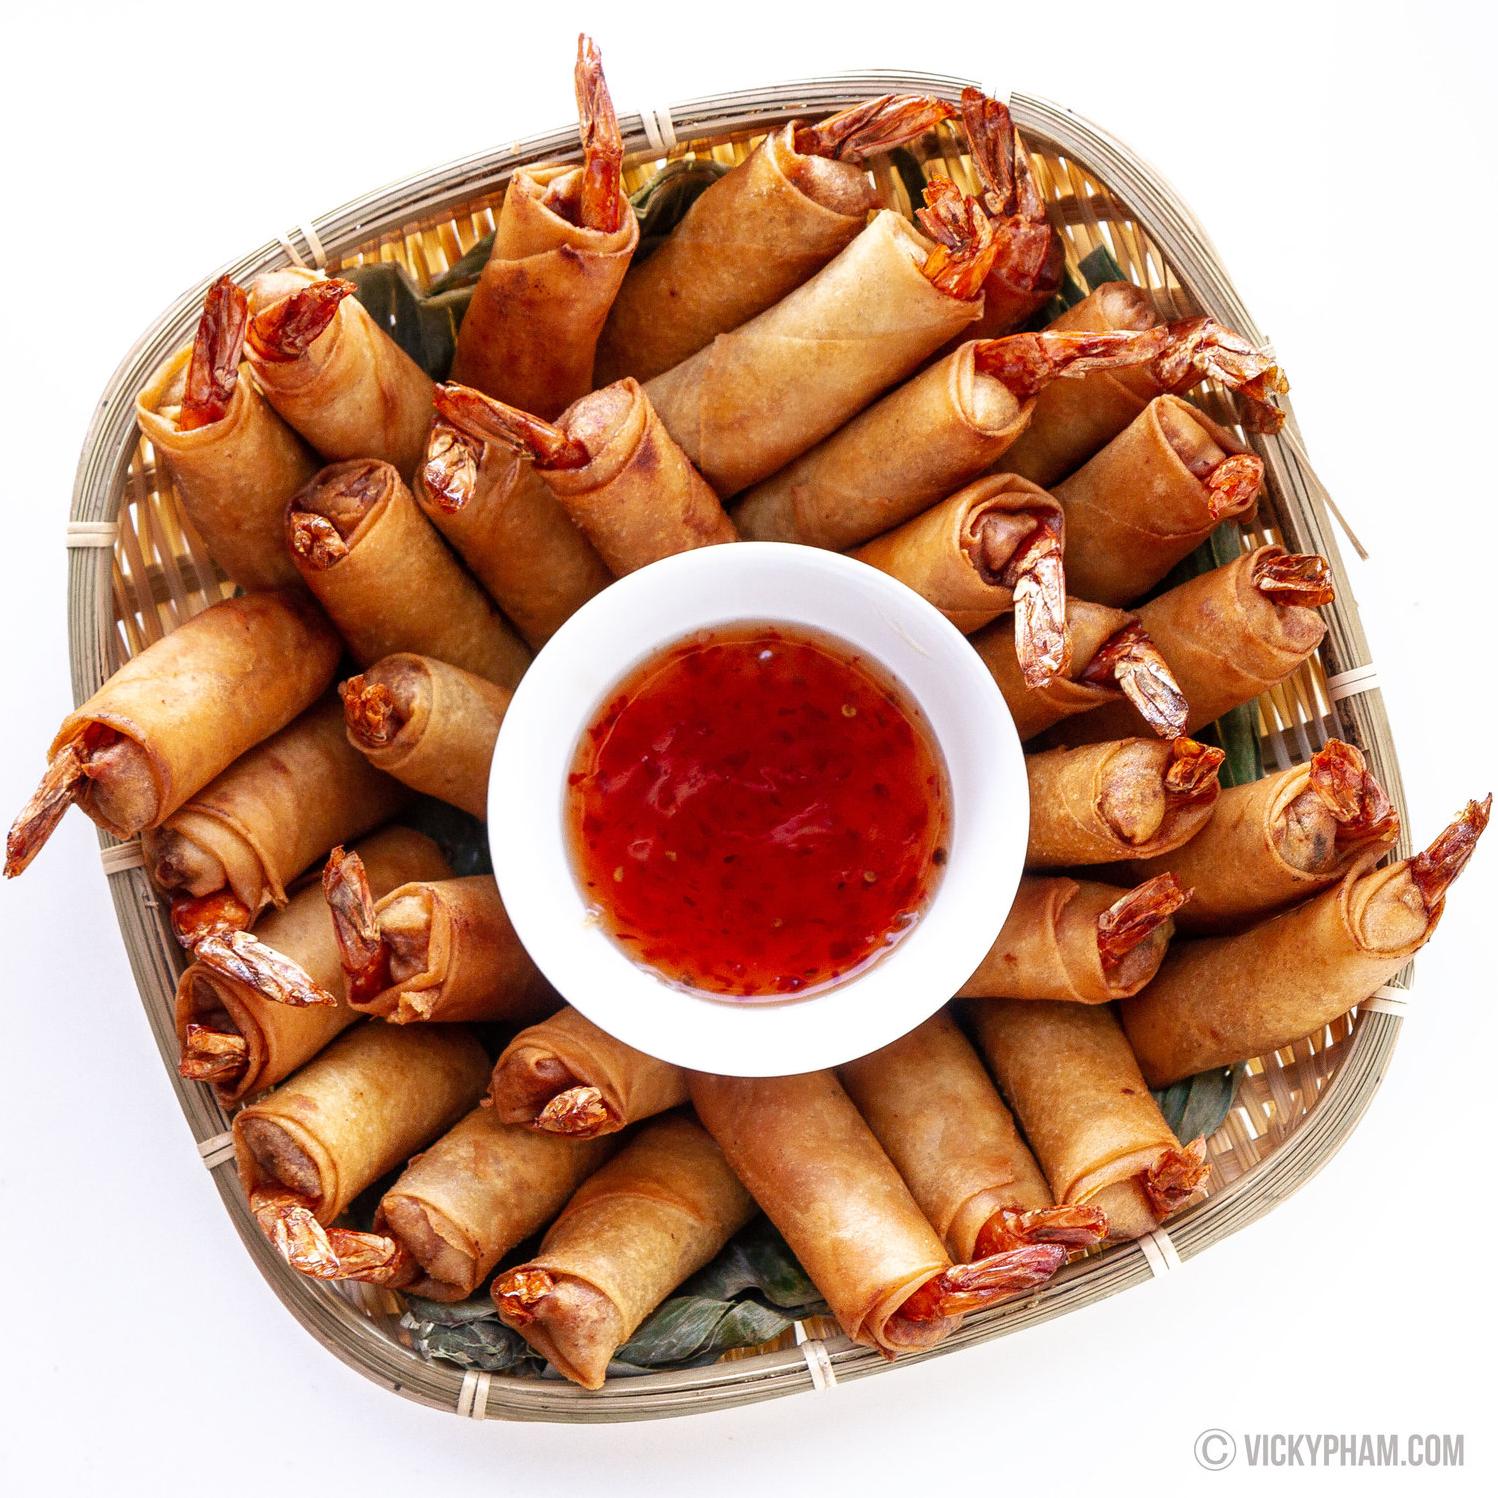  These Vietnam Style Pork and Shrimp Egg Rolls are the perfect appetizer for any occasion!